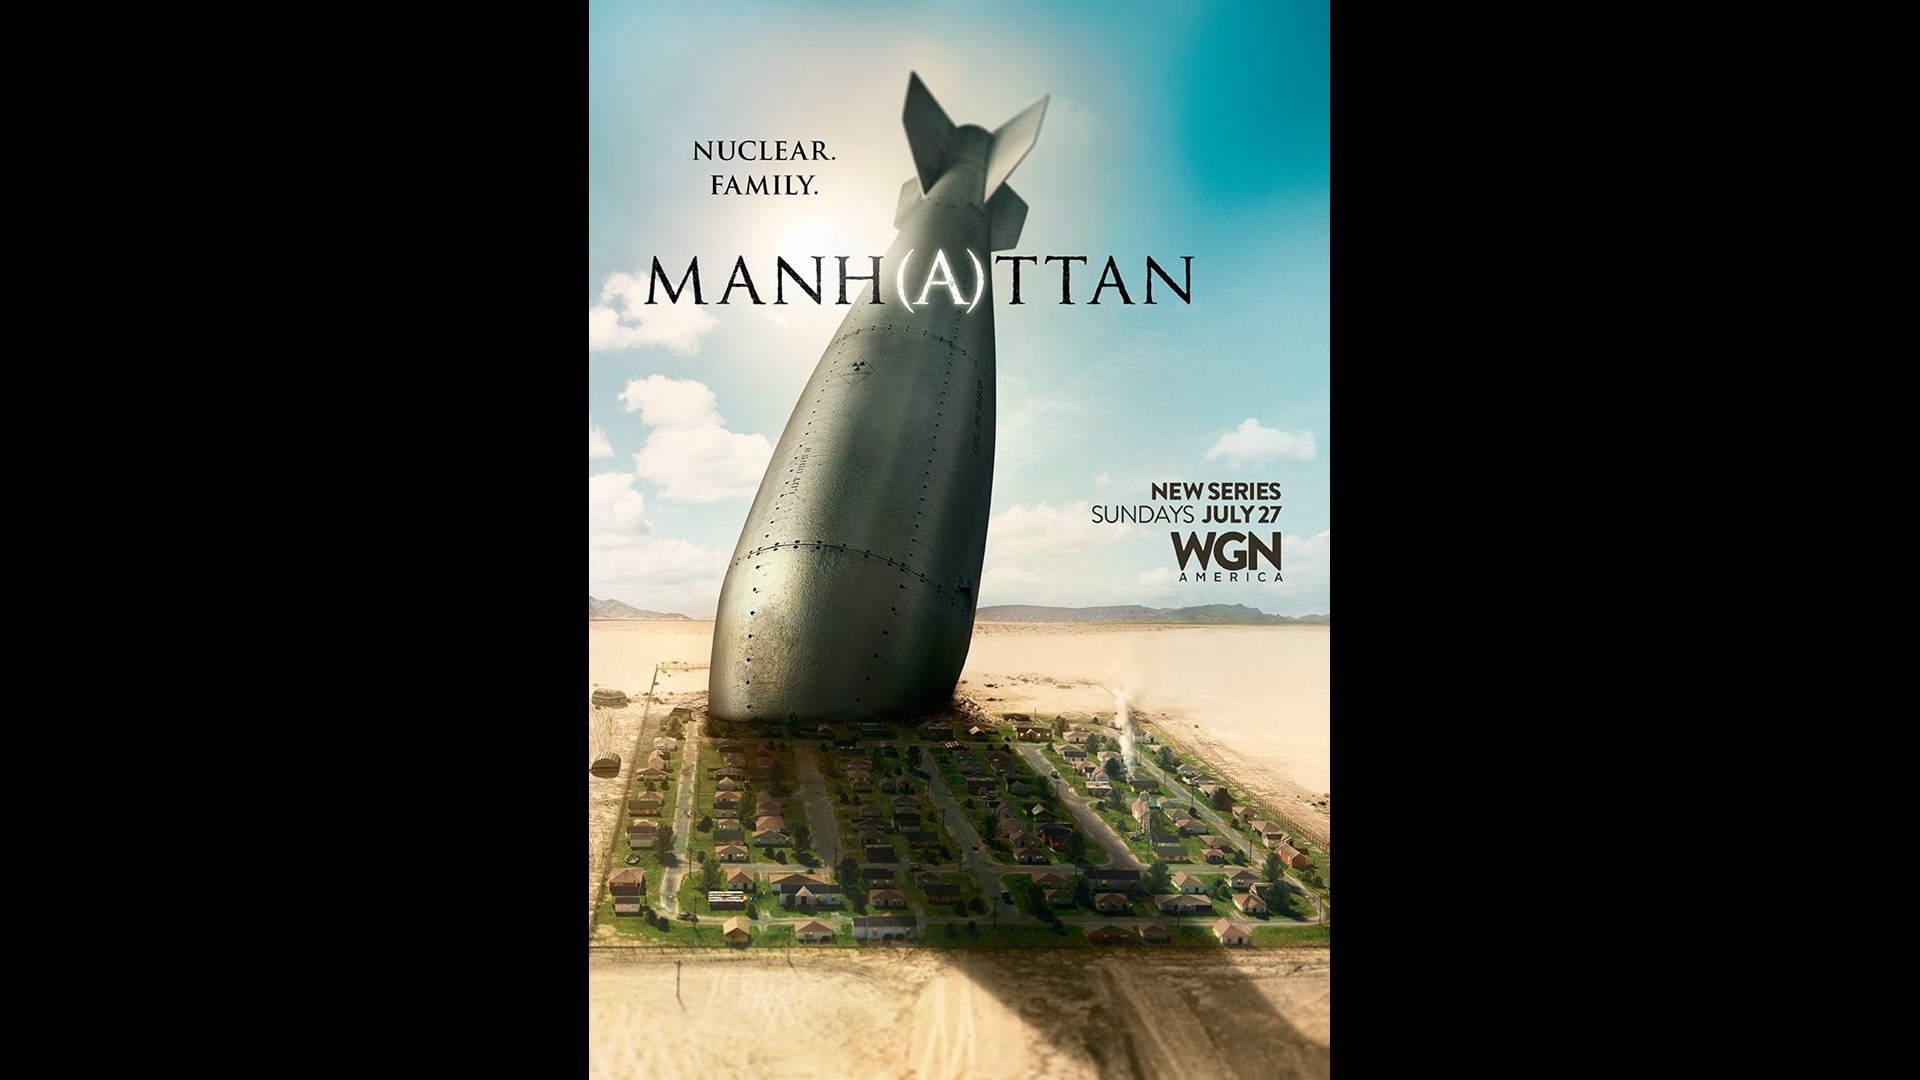 New Cable TV Series “Manhattan”